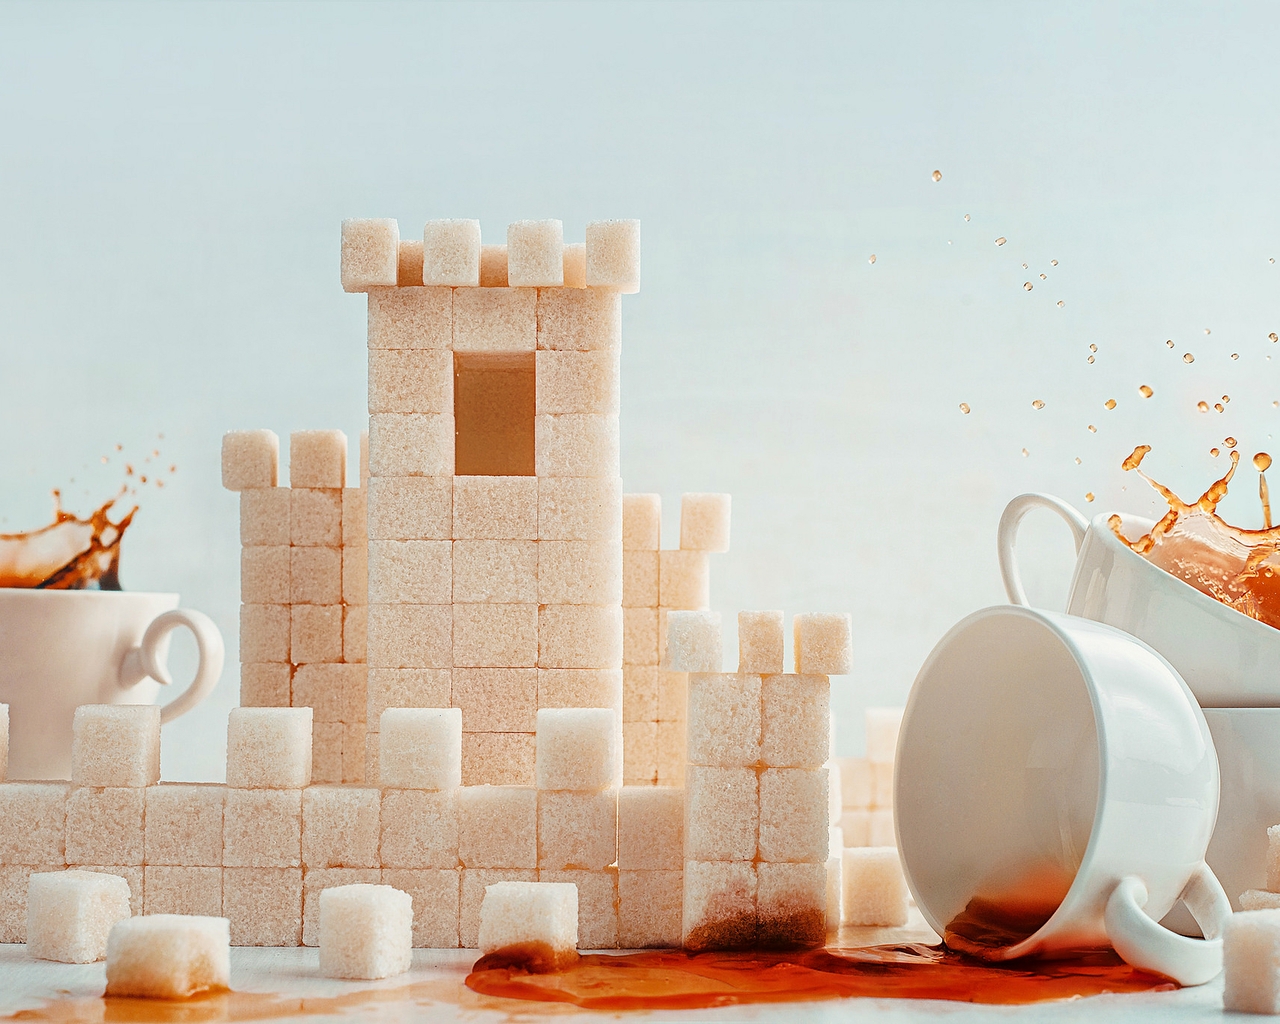 Sugar Cubes and Coffee Cups for 1280 x 1024 resolution